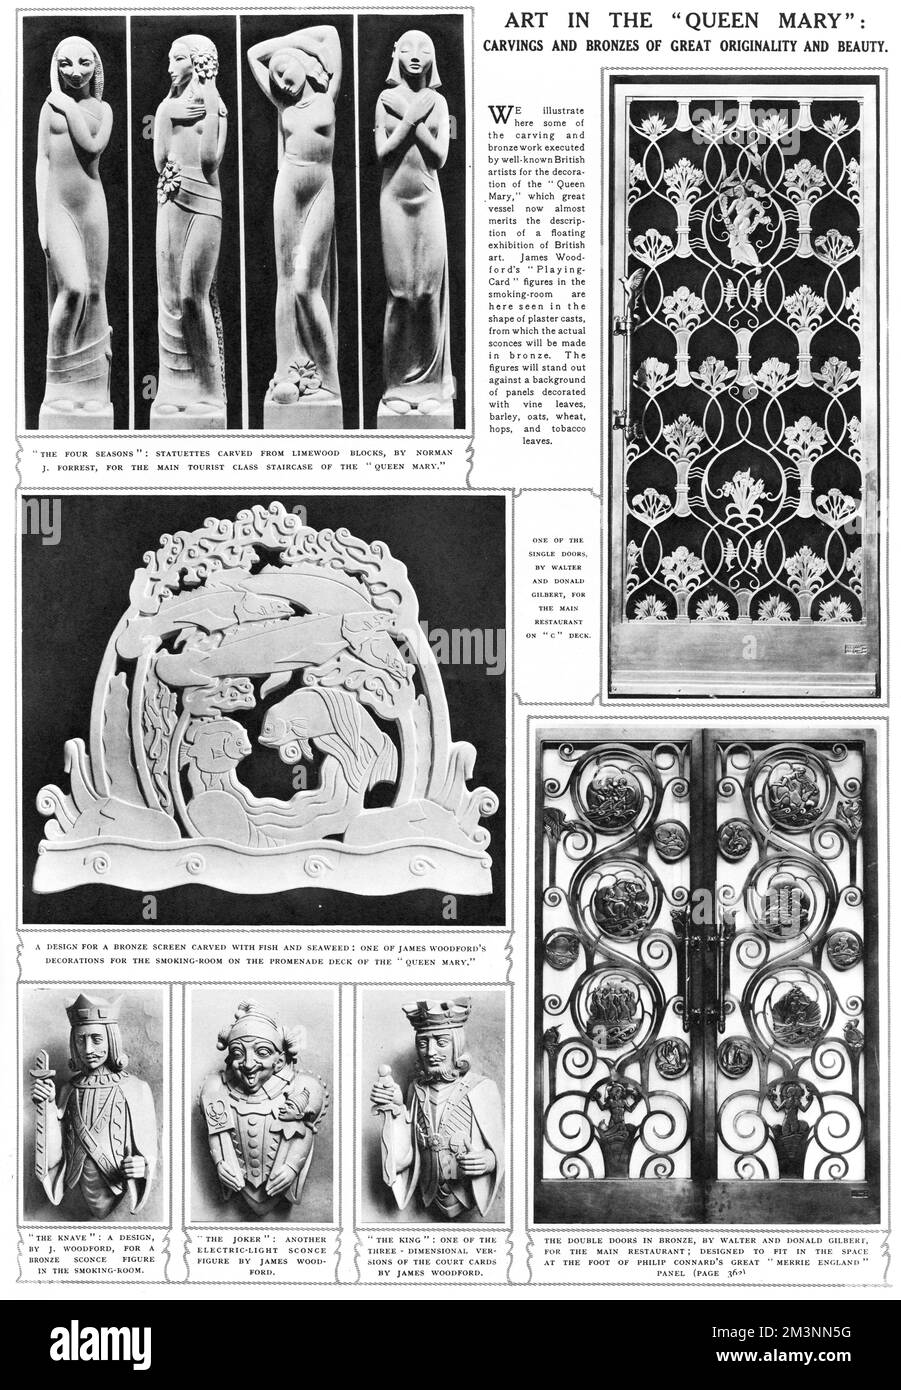 Examples of art on the RMS Queen Mary.  At the top left are four statuettes carved from limewood blocks by Norman J Forrest, representing The Four Seasons, for the main tourist class staircase.  Below is a design by James Woodford for a bronze screen carved with fish and seaweed, for the Smoking Room on the Promenade Deck.  At the bottom left are The Knave, The Joker and The King, by James Woodford, bronze electric light sconce figures for the Smoking Room.  On the right is are a single door and double doors in bronze by Walter and Donald Gilbert, for the main restaurant on C Deck.      Date: Stock Photo